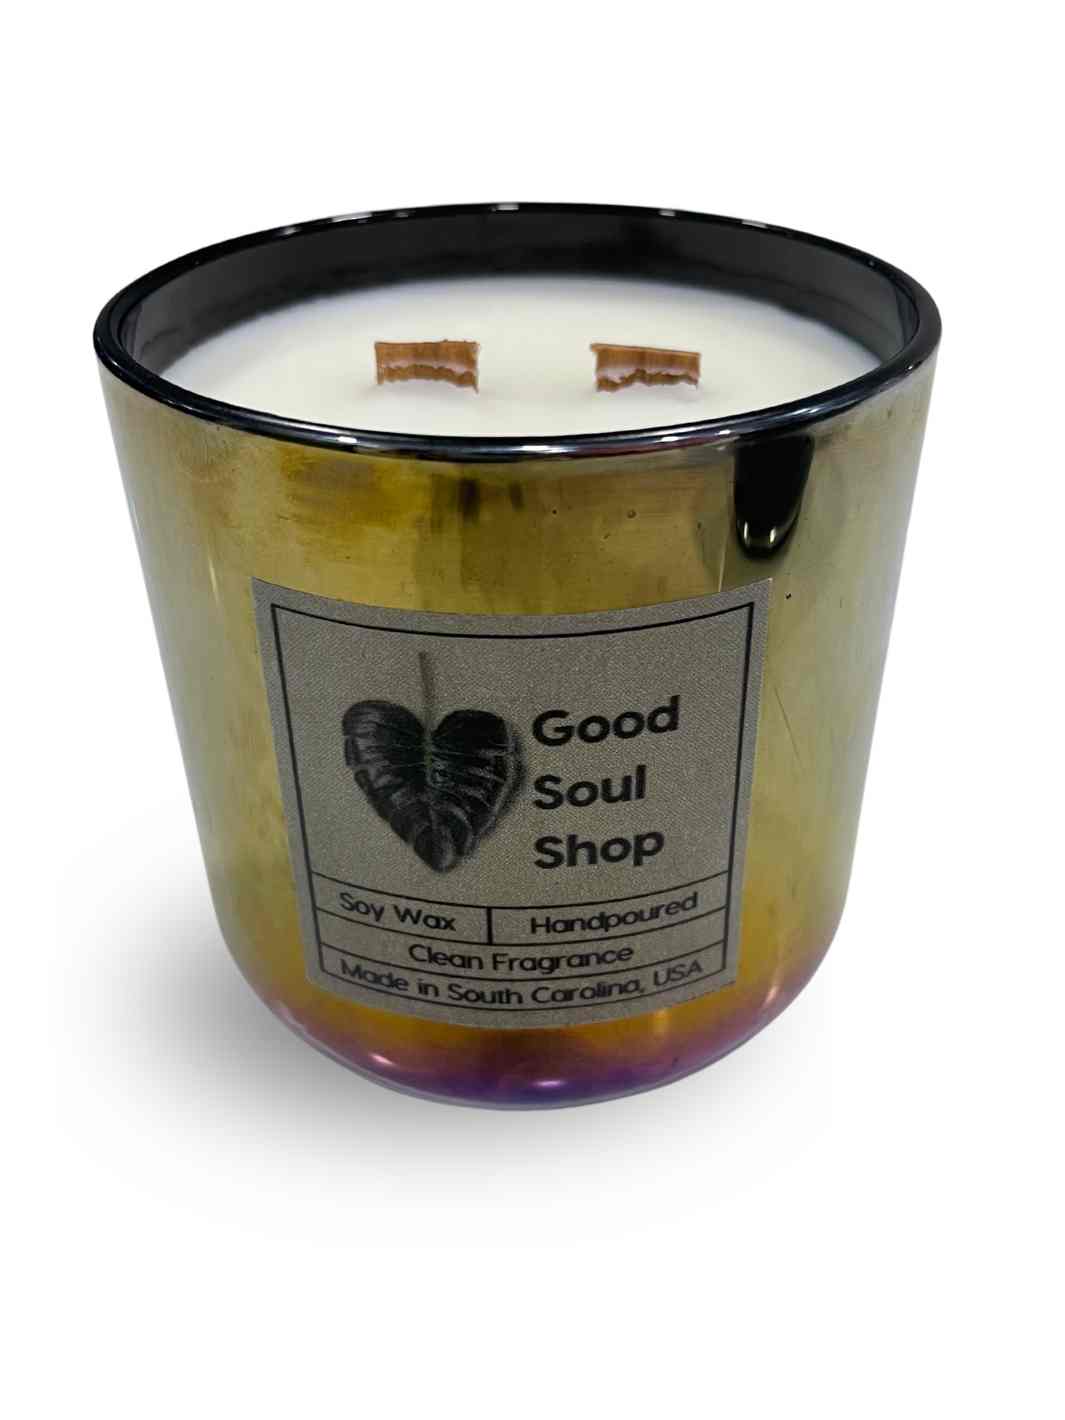 Good Soul Shop Double Wood Wick Handpoured Soy Candle Iridescent Glass